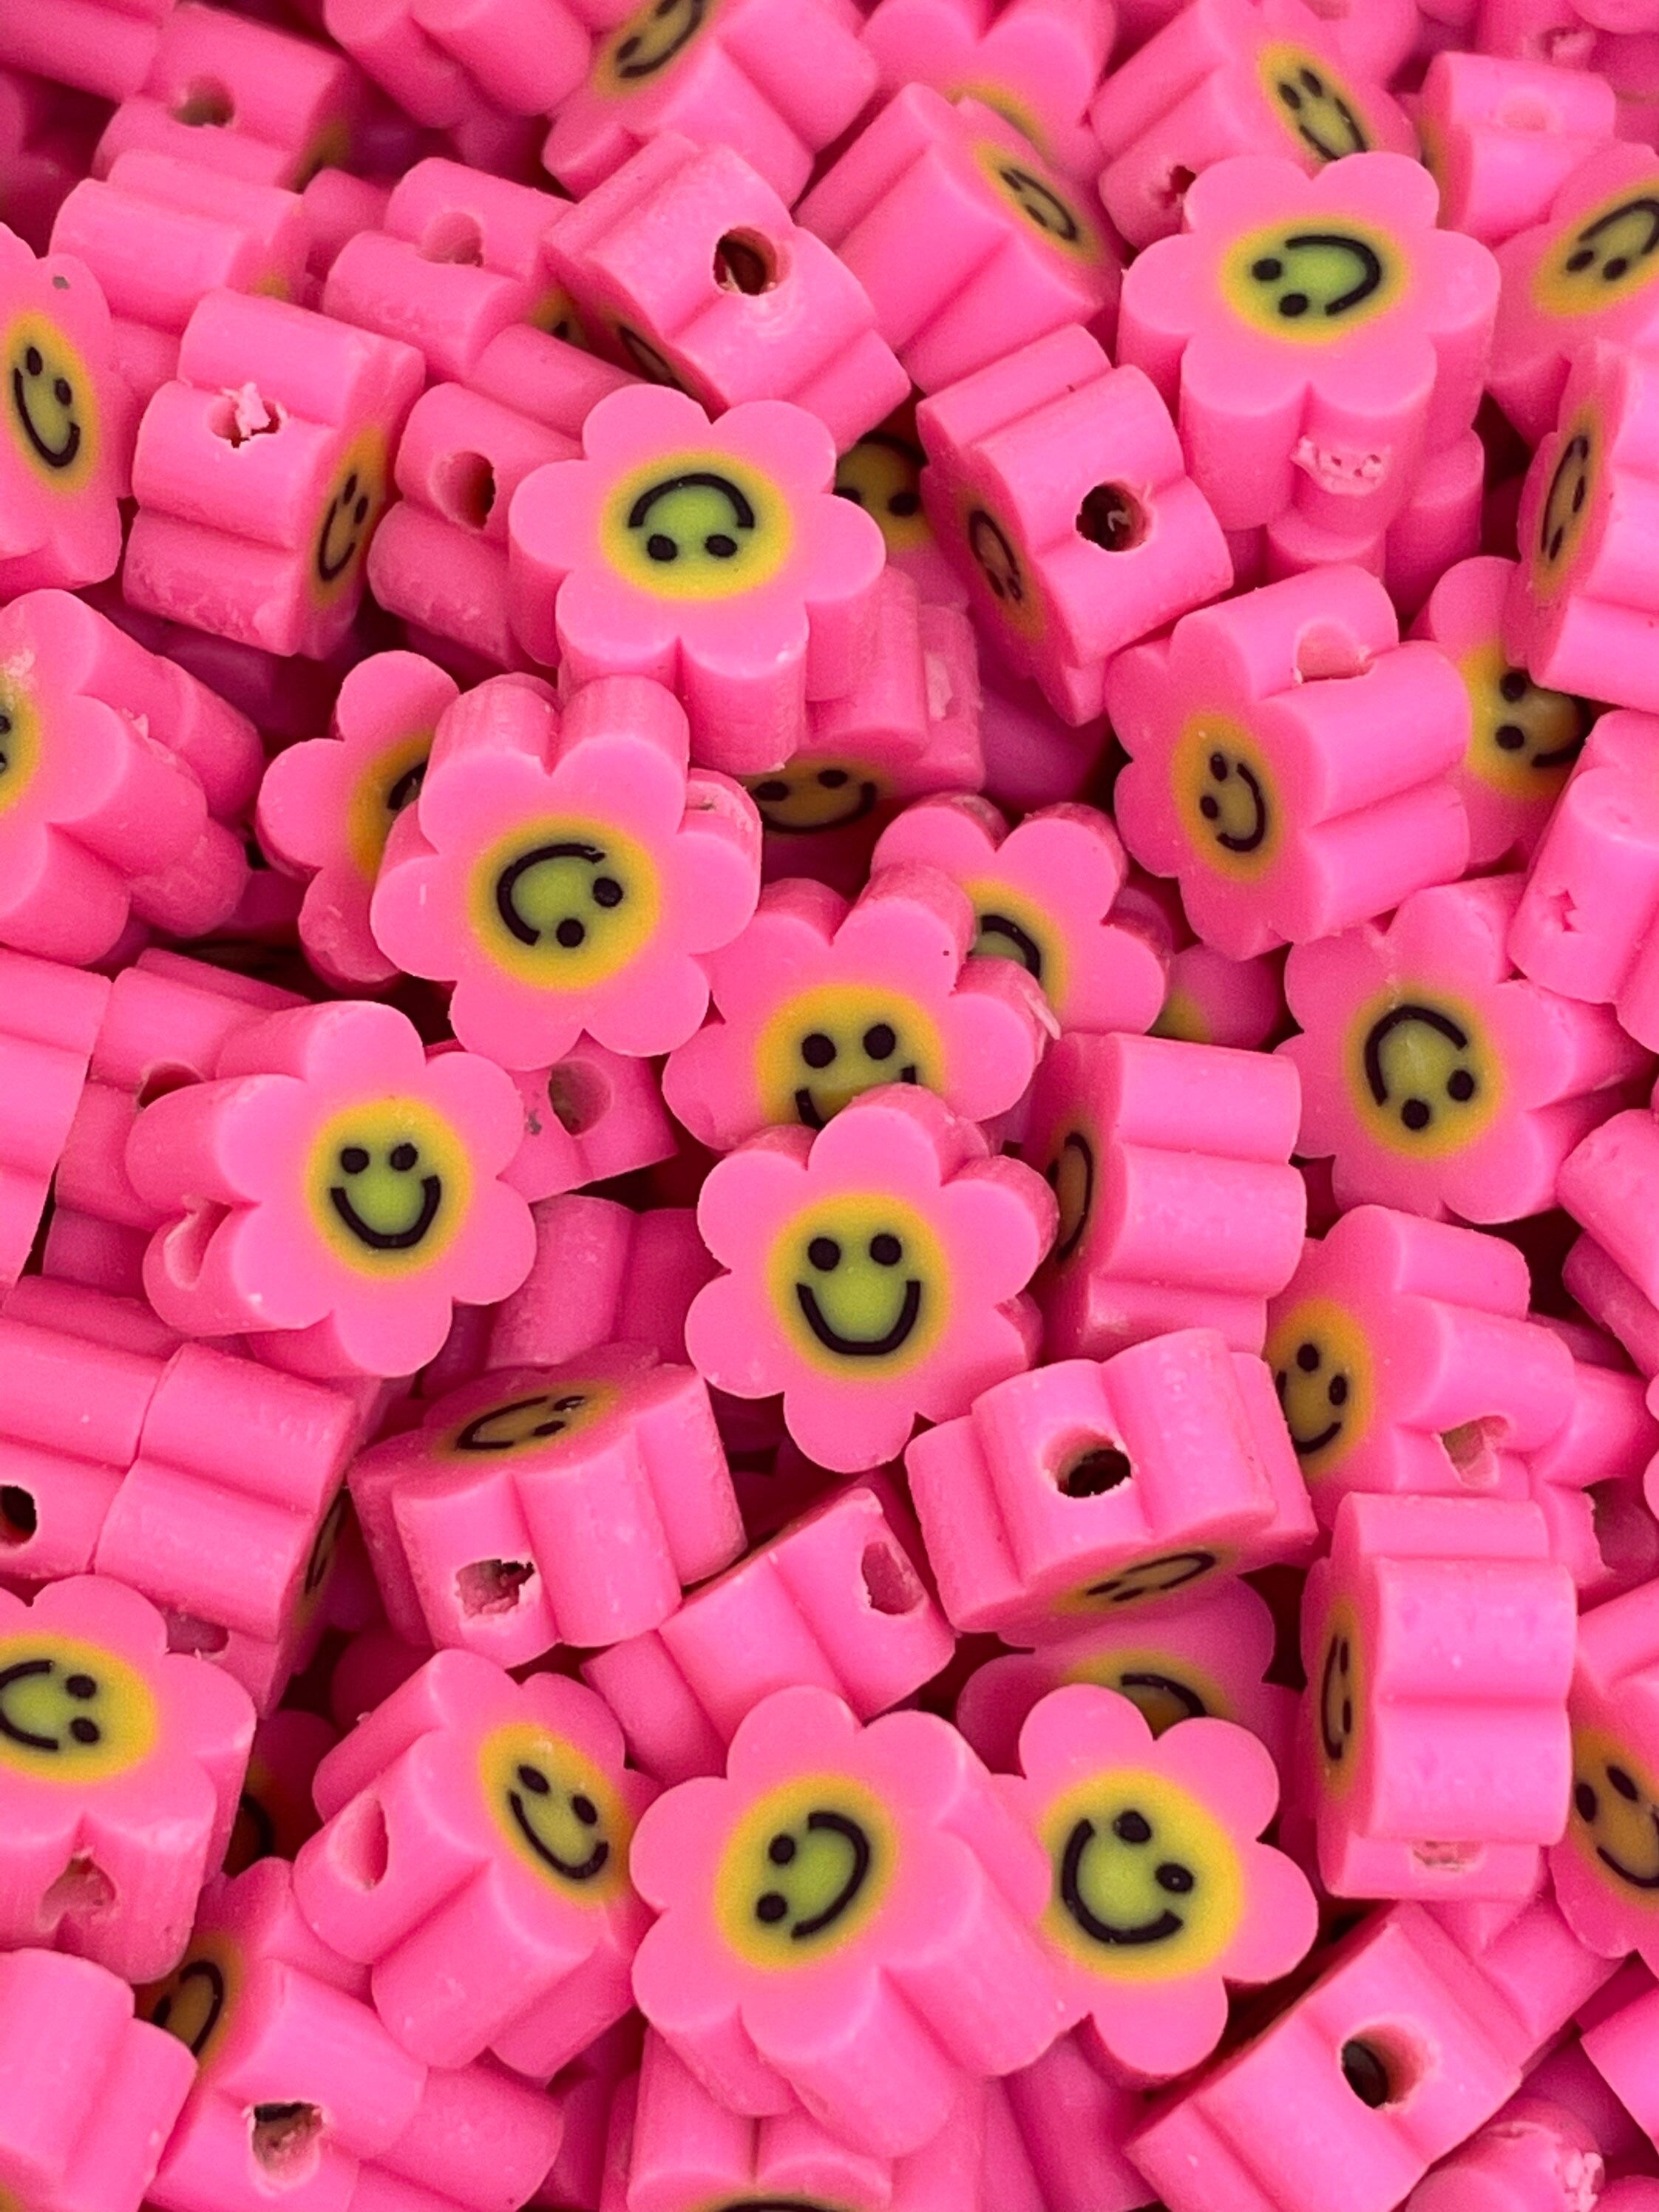 Cute Happy Face Flower Beads, Emoji Beads, Charm for Jewelry Making, Pink Beads, Bright Colored Clay Beads